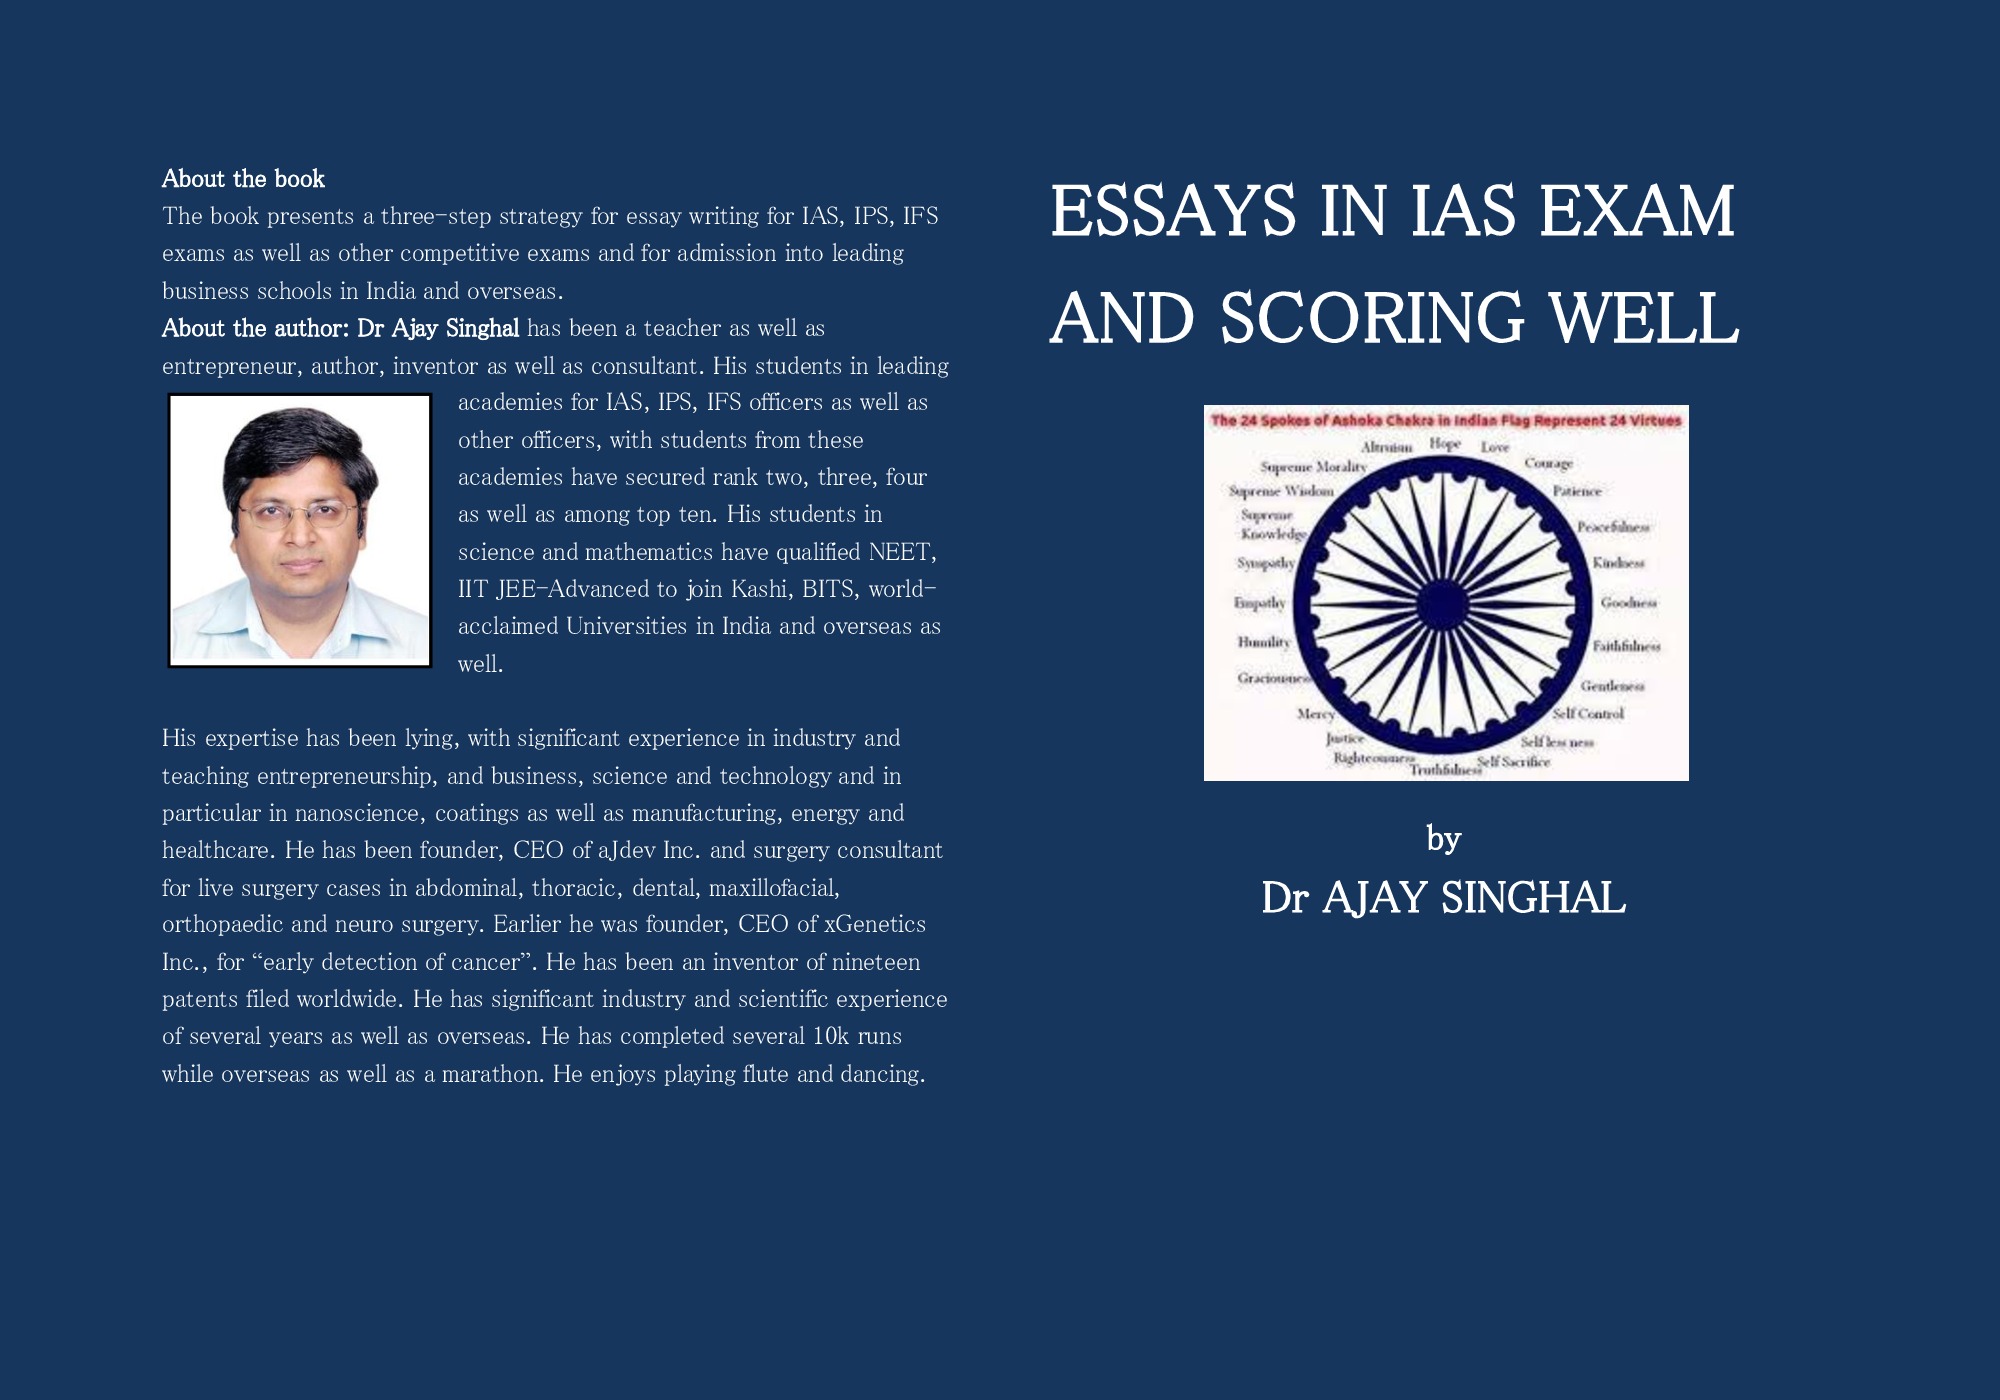 which type of essay comes in ias exam